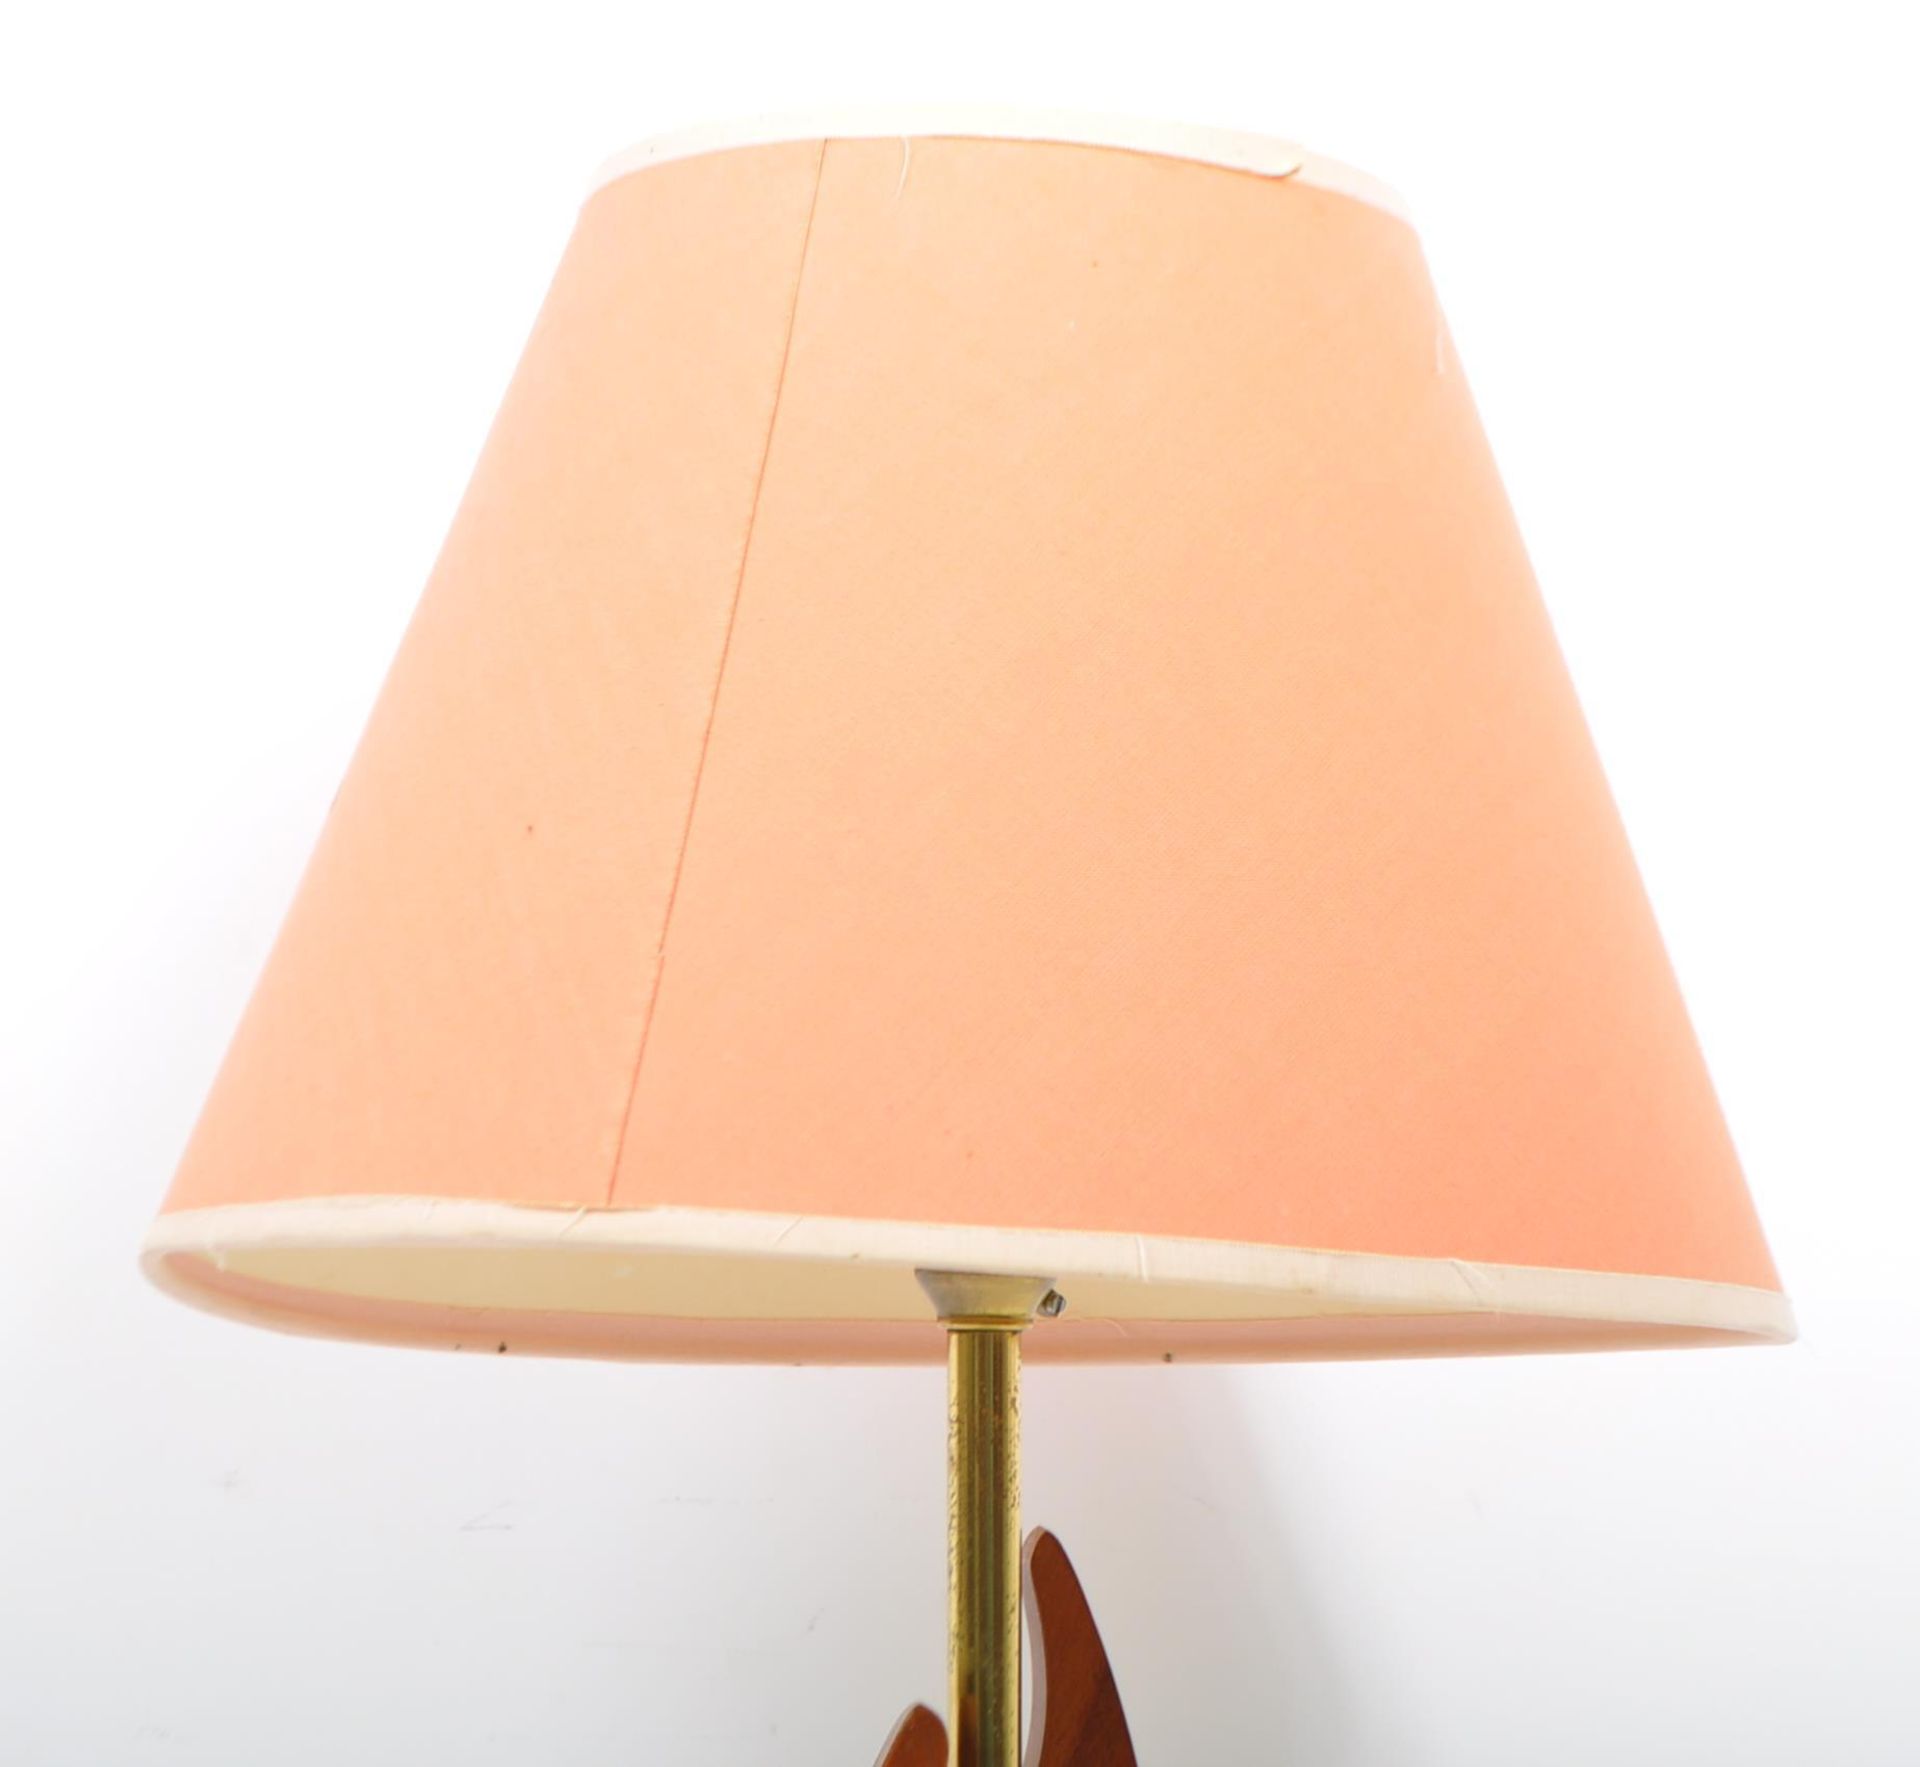 MID CENTURY TEAK AND BRASS TABLE LAMP - Image 3 of 4